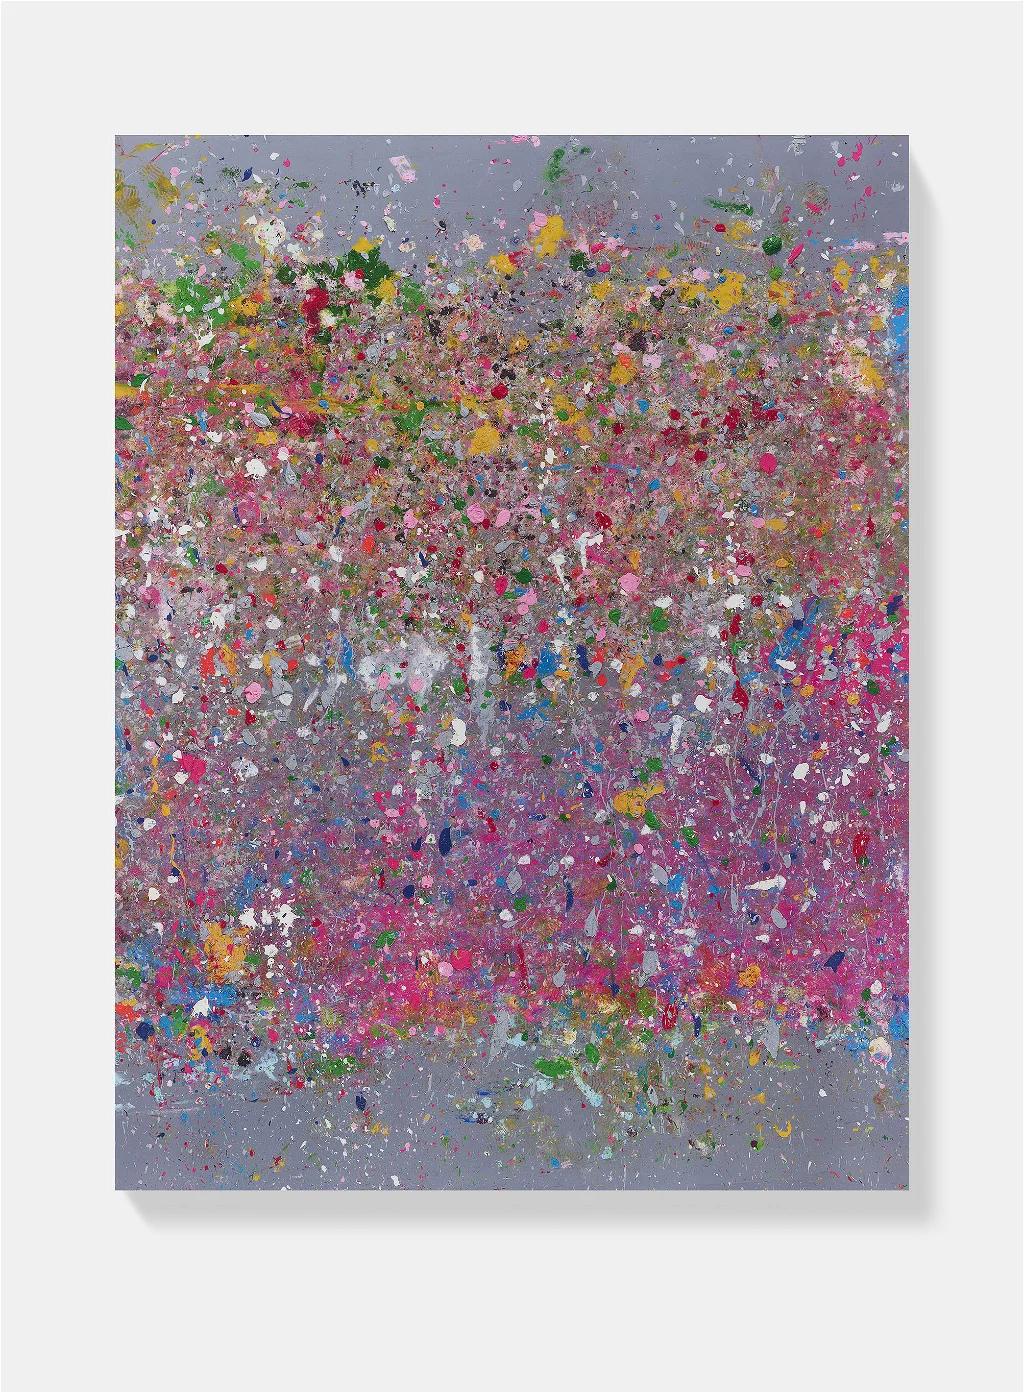 DAMIEN HIRST - STUDLAND BAY. Where the land meets the sea. Abstraction, British - Abstract Expressionist Print by Damien Hirst